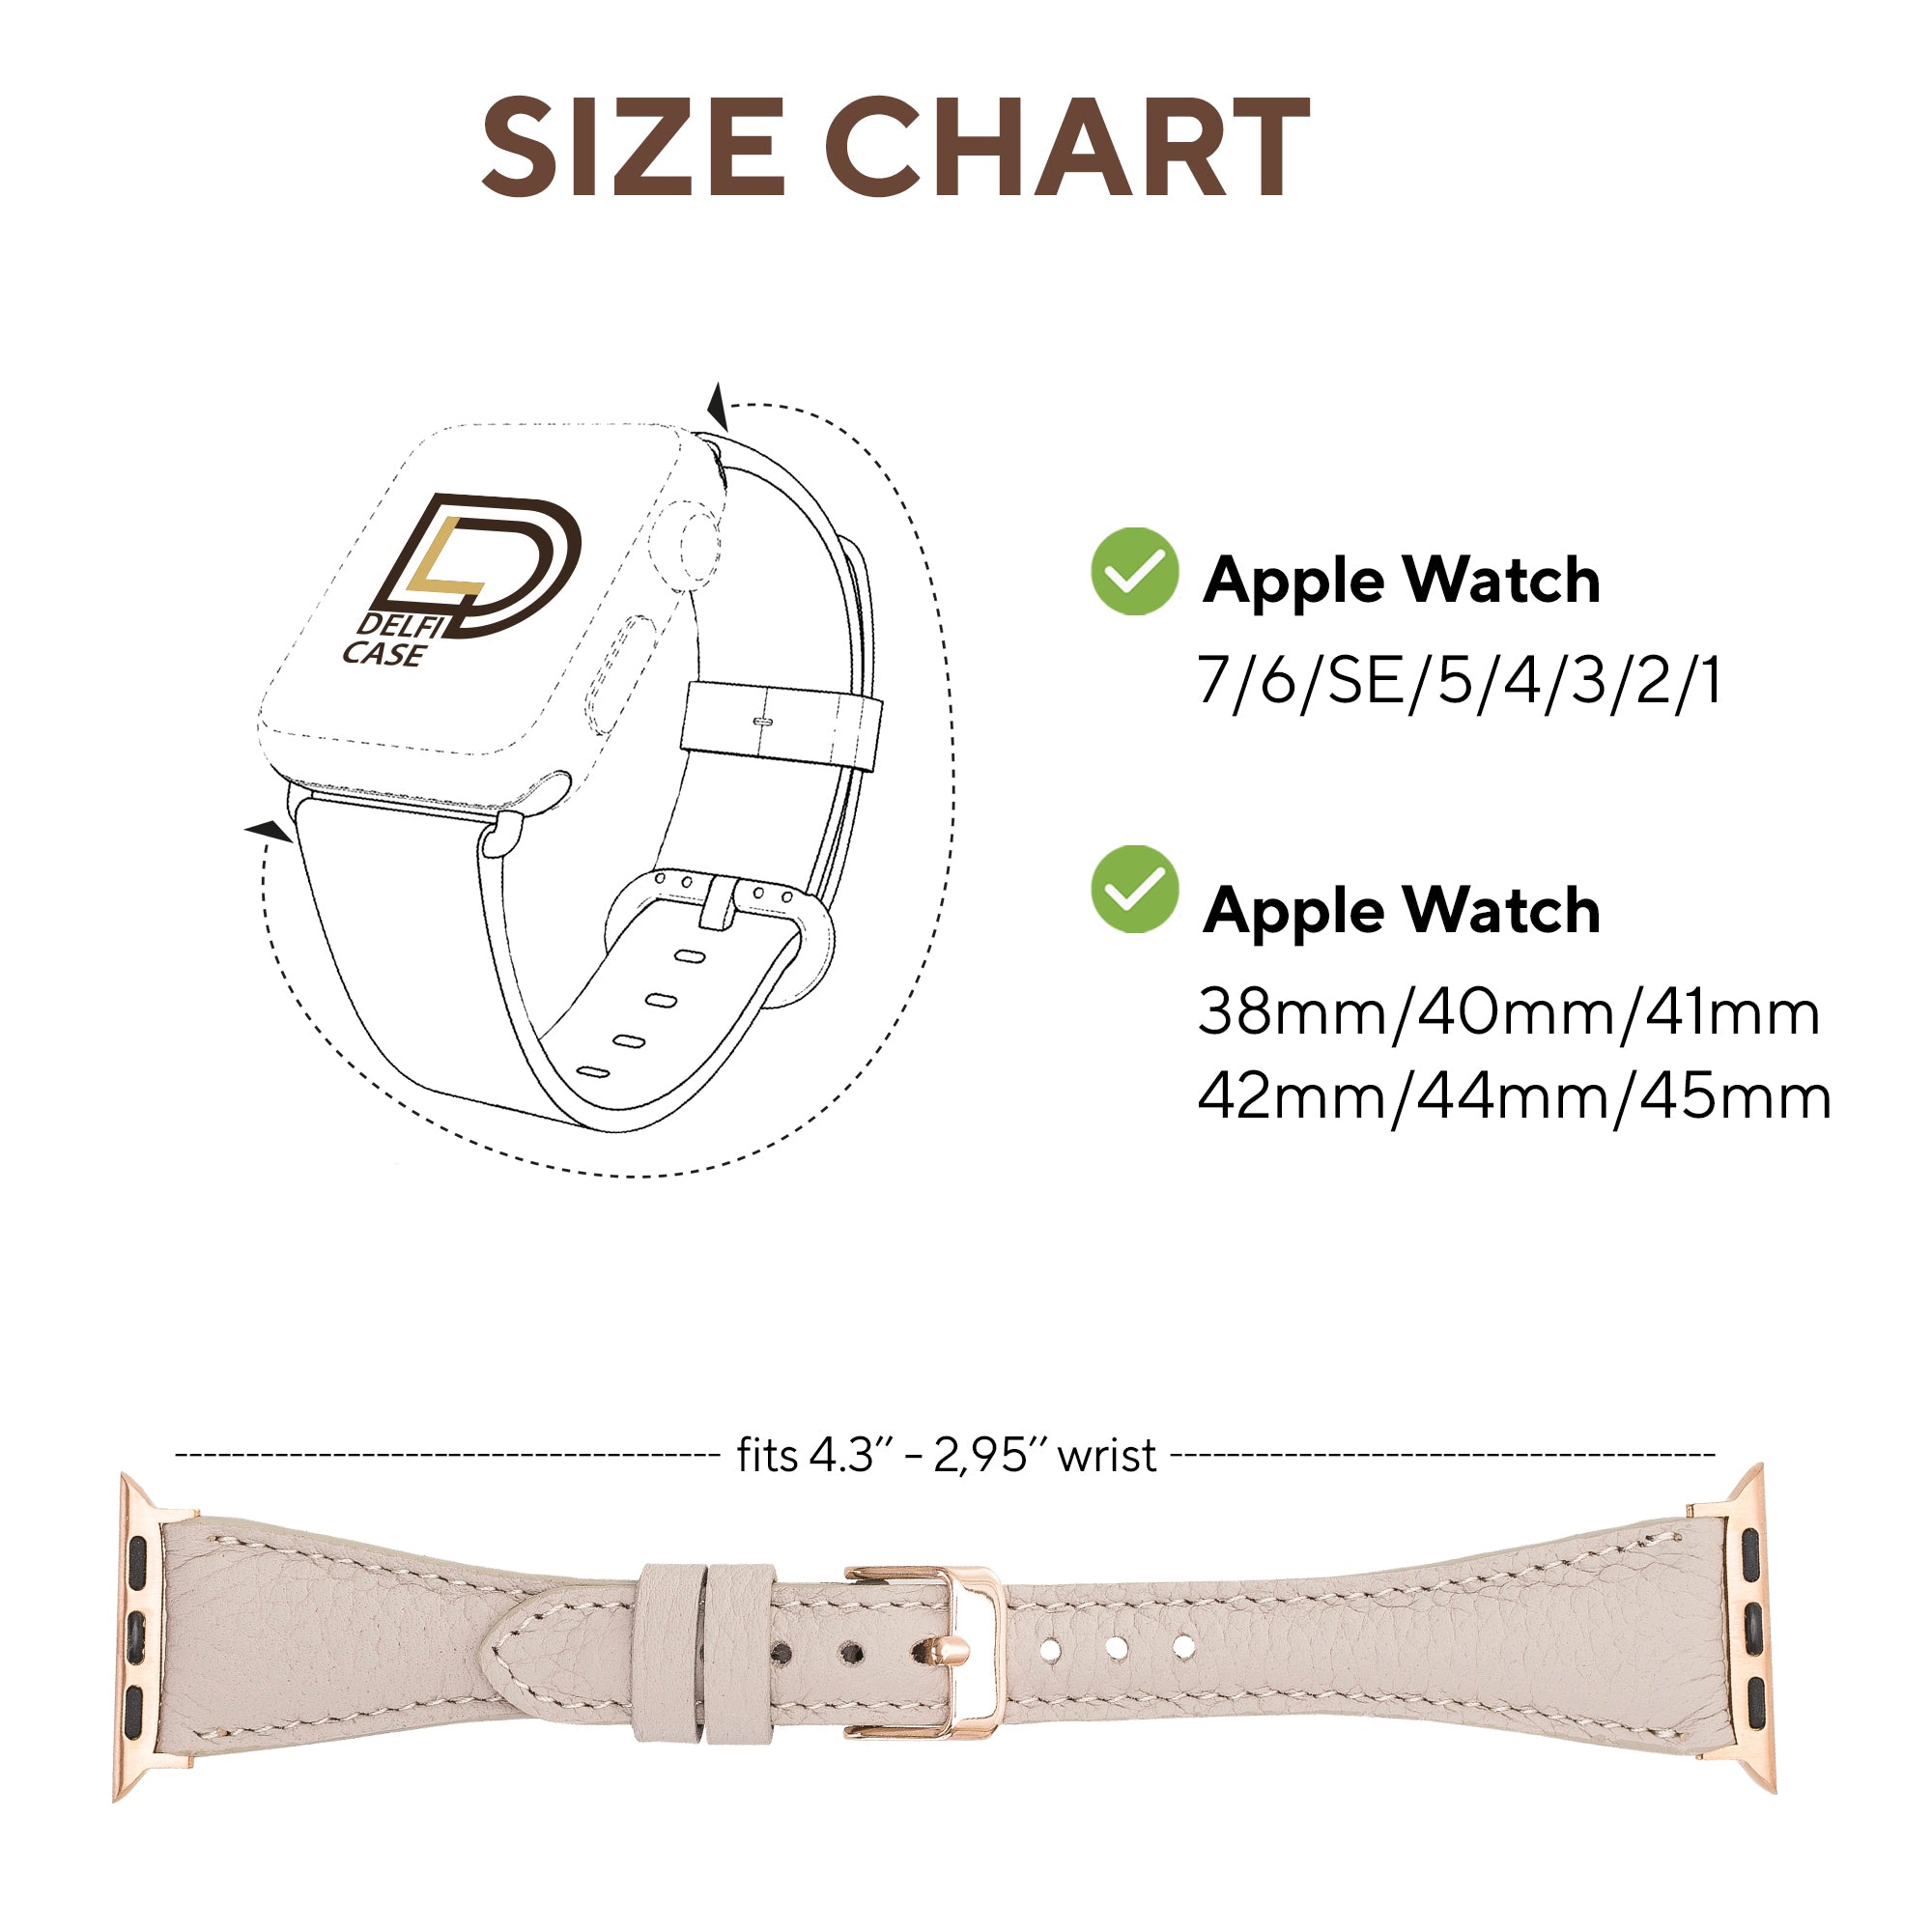 DelfiCase Beige Leather Watch Band for Apple Watch and Fitbit Versa 3 2 1 Watch Band 4